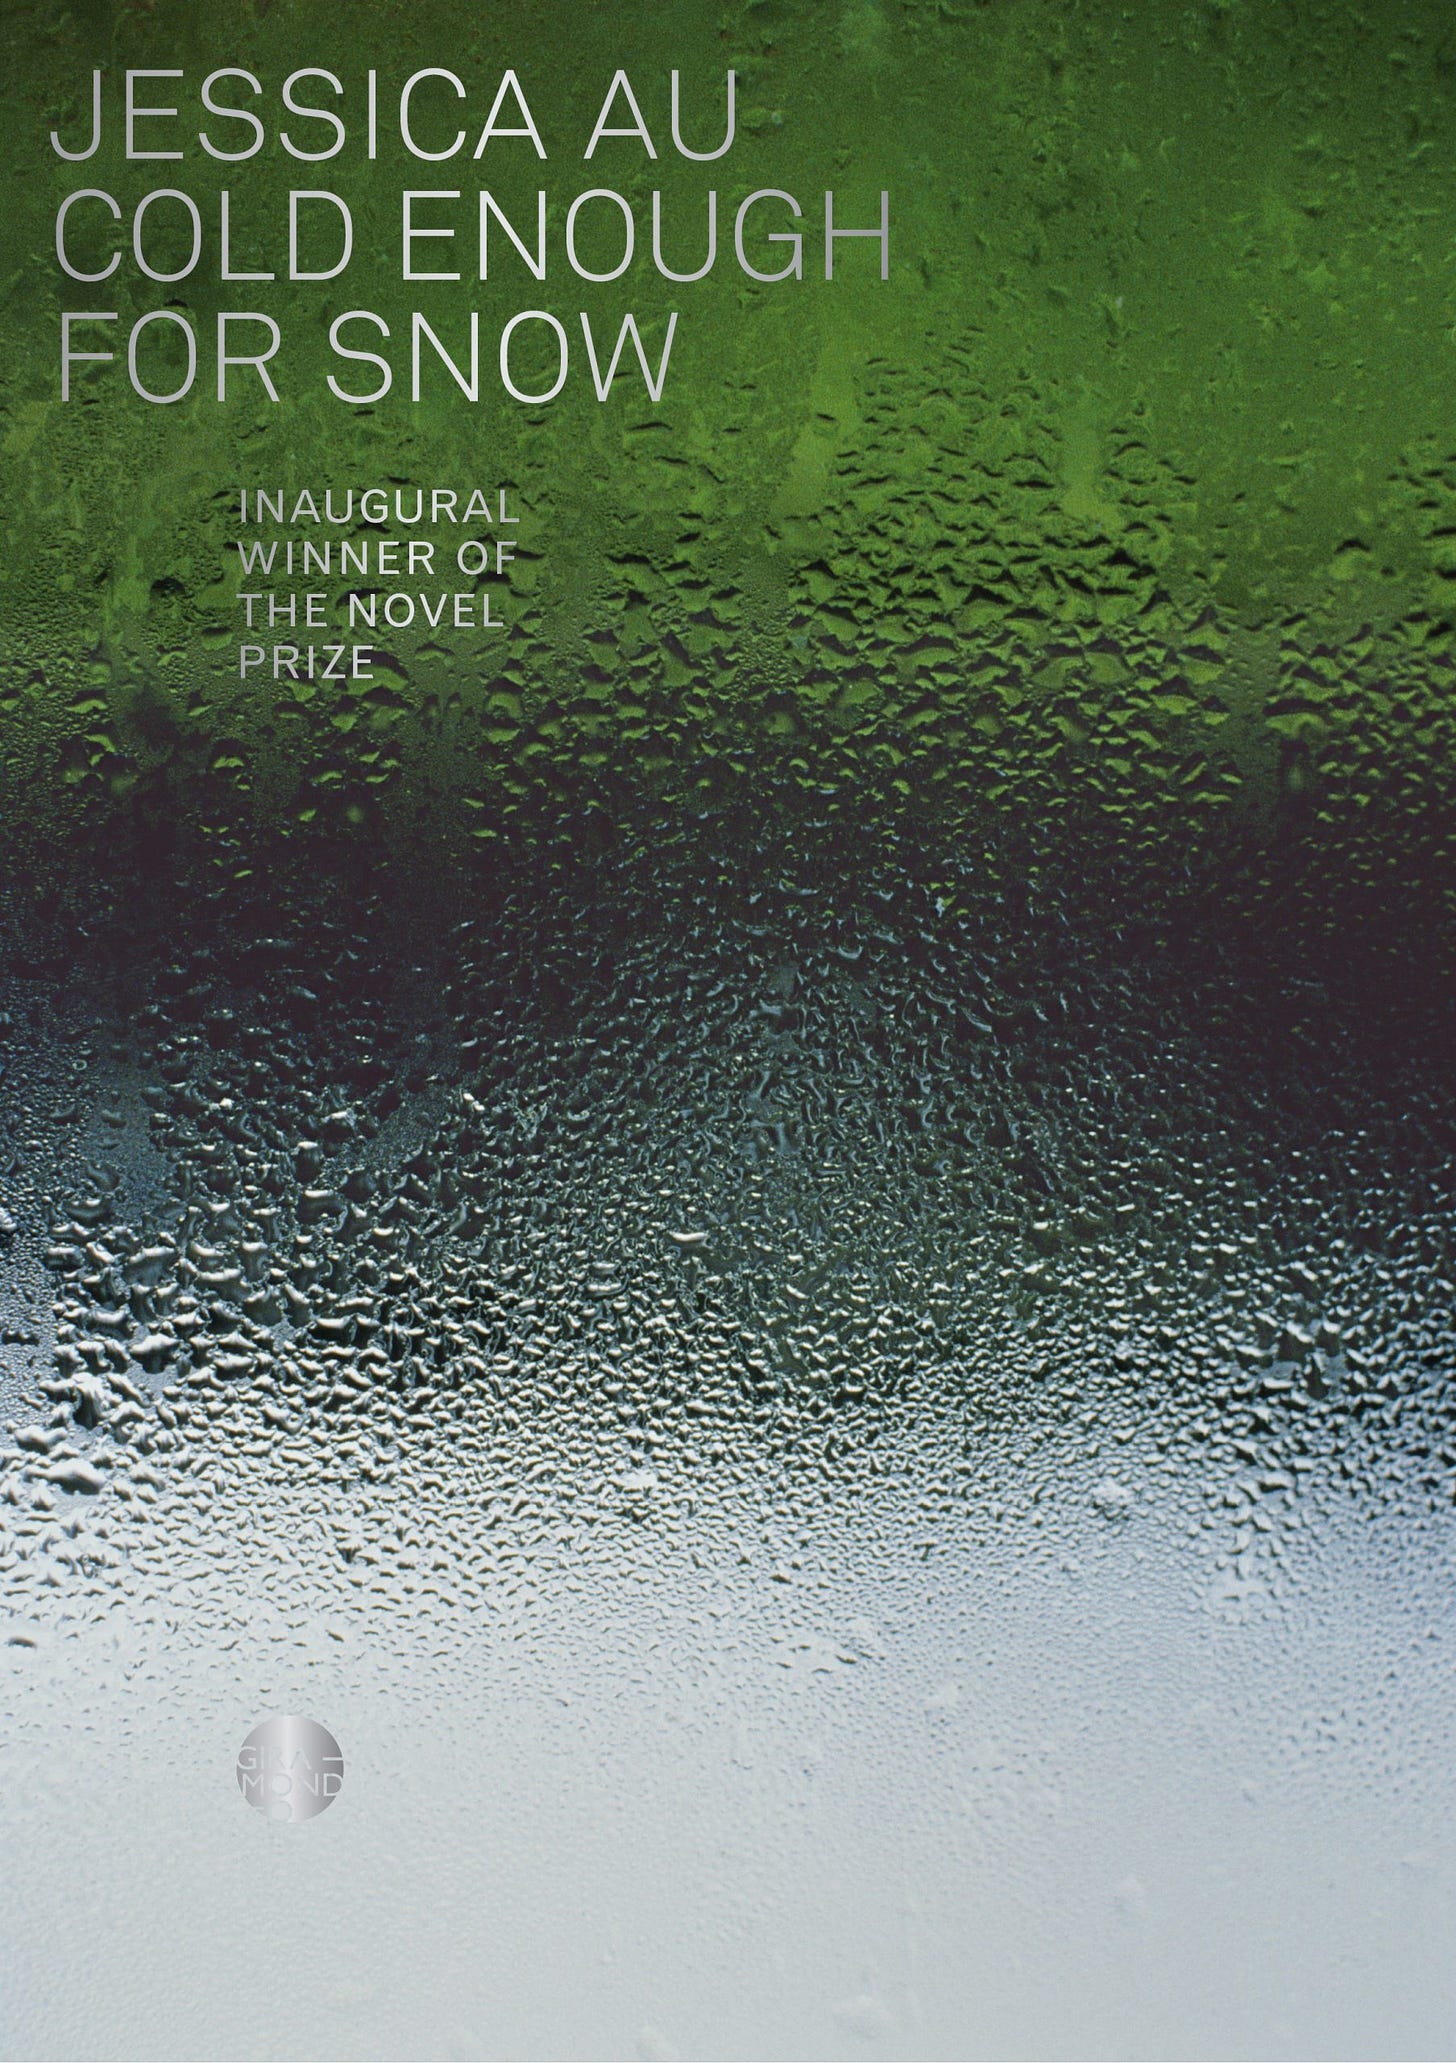 Cover of Jessica Au's book, Cold Enough for Snow, with a dew or rain covered pain of glass in shades of green, black, and grey